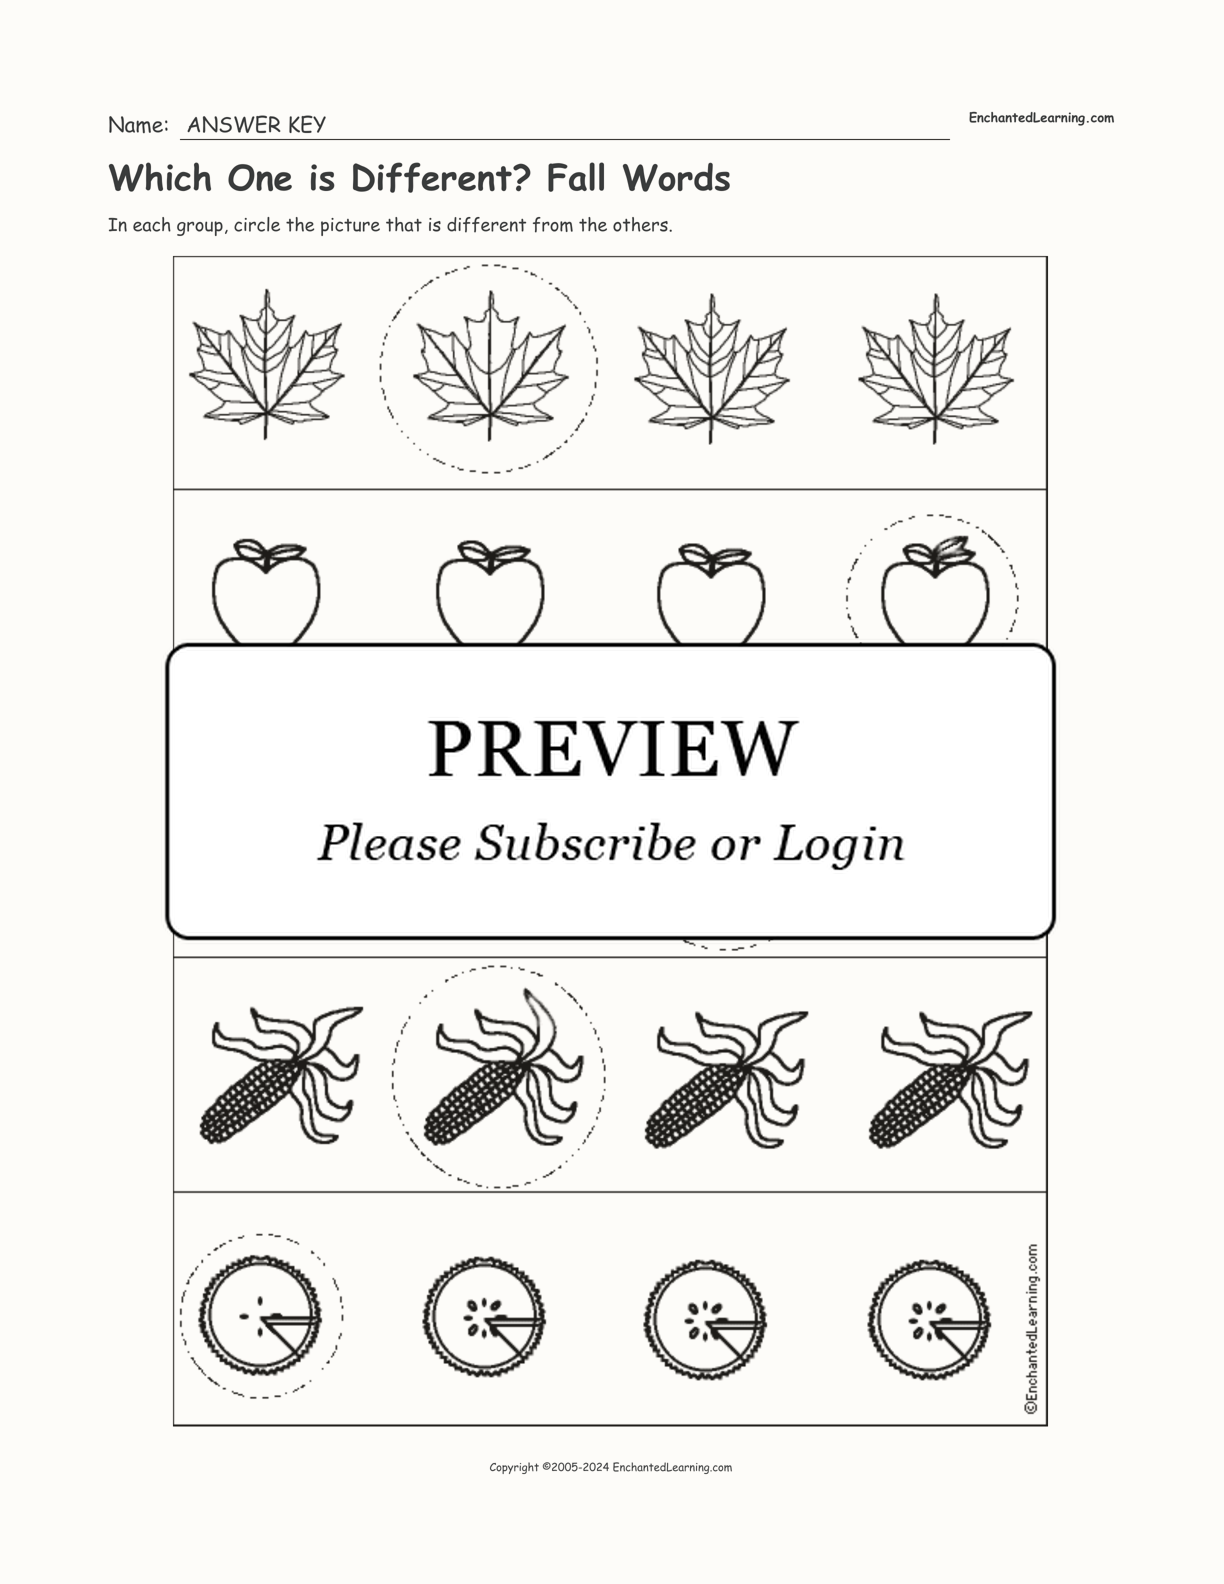 Which One is Different? Fall Words interactive worksheet page 2